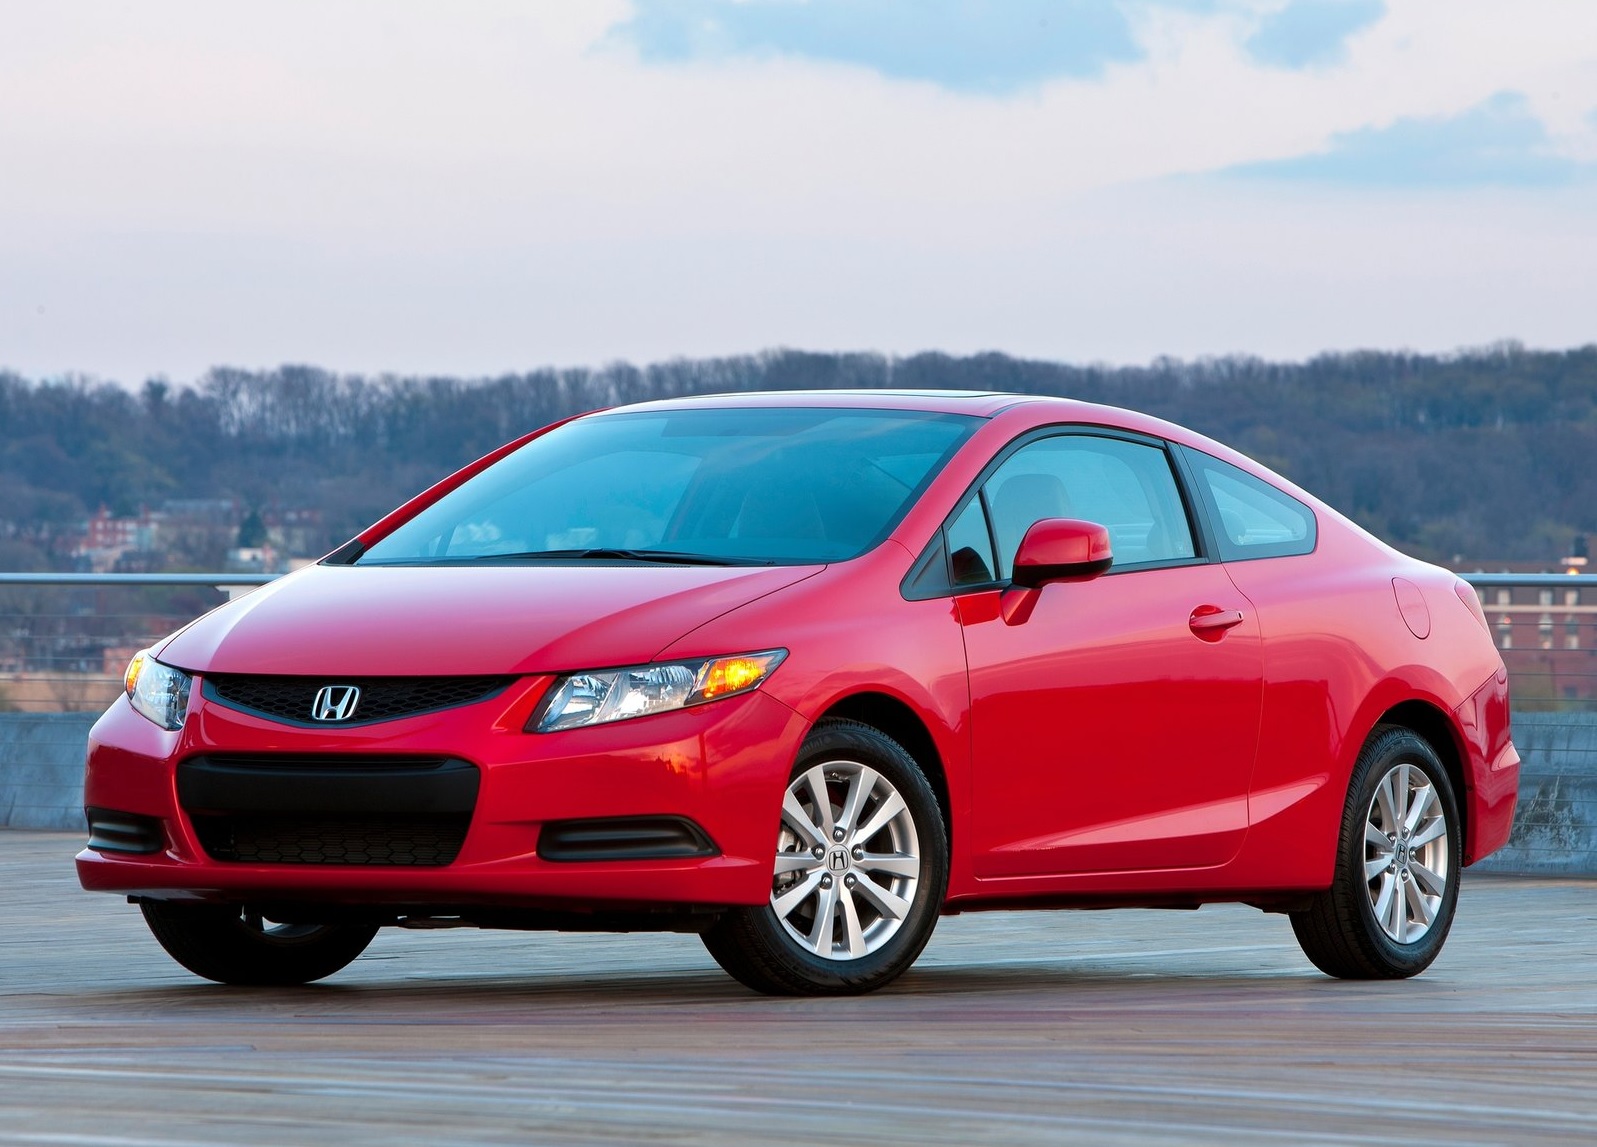 Pre-Owned Honda Civic: How Much Should You Pay? - The Car Guide